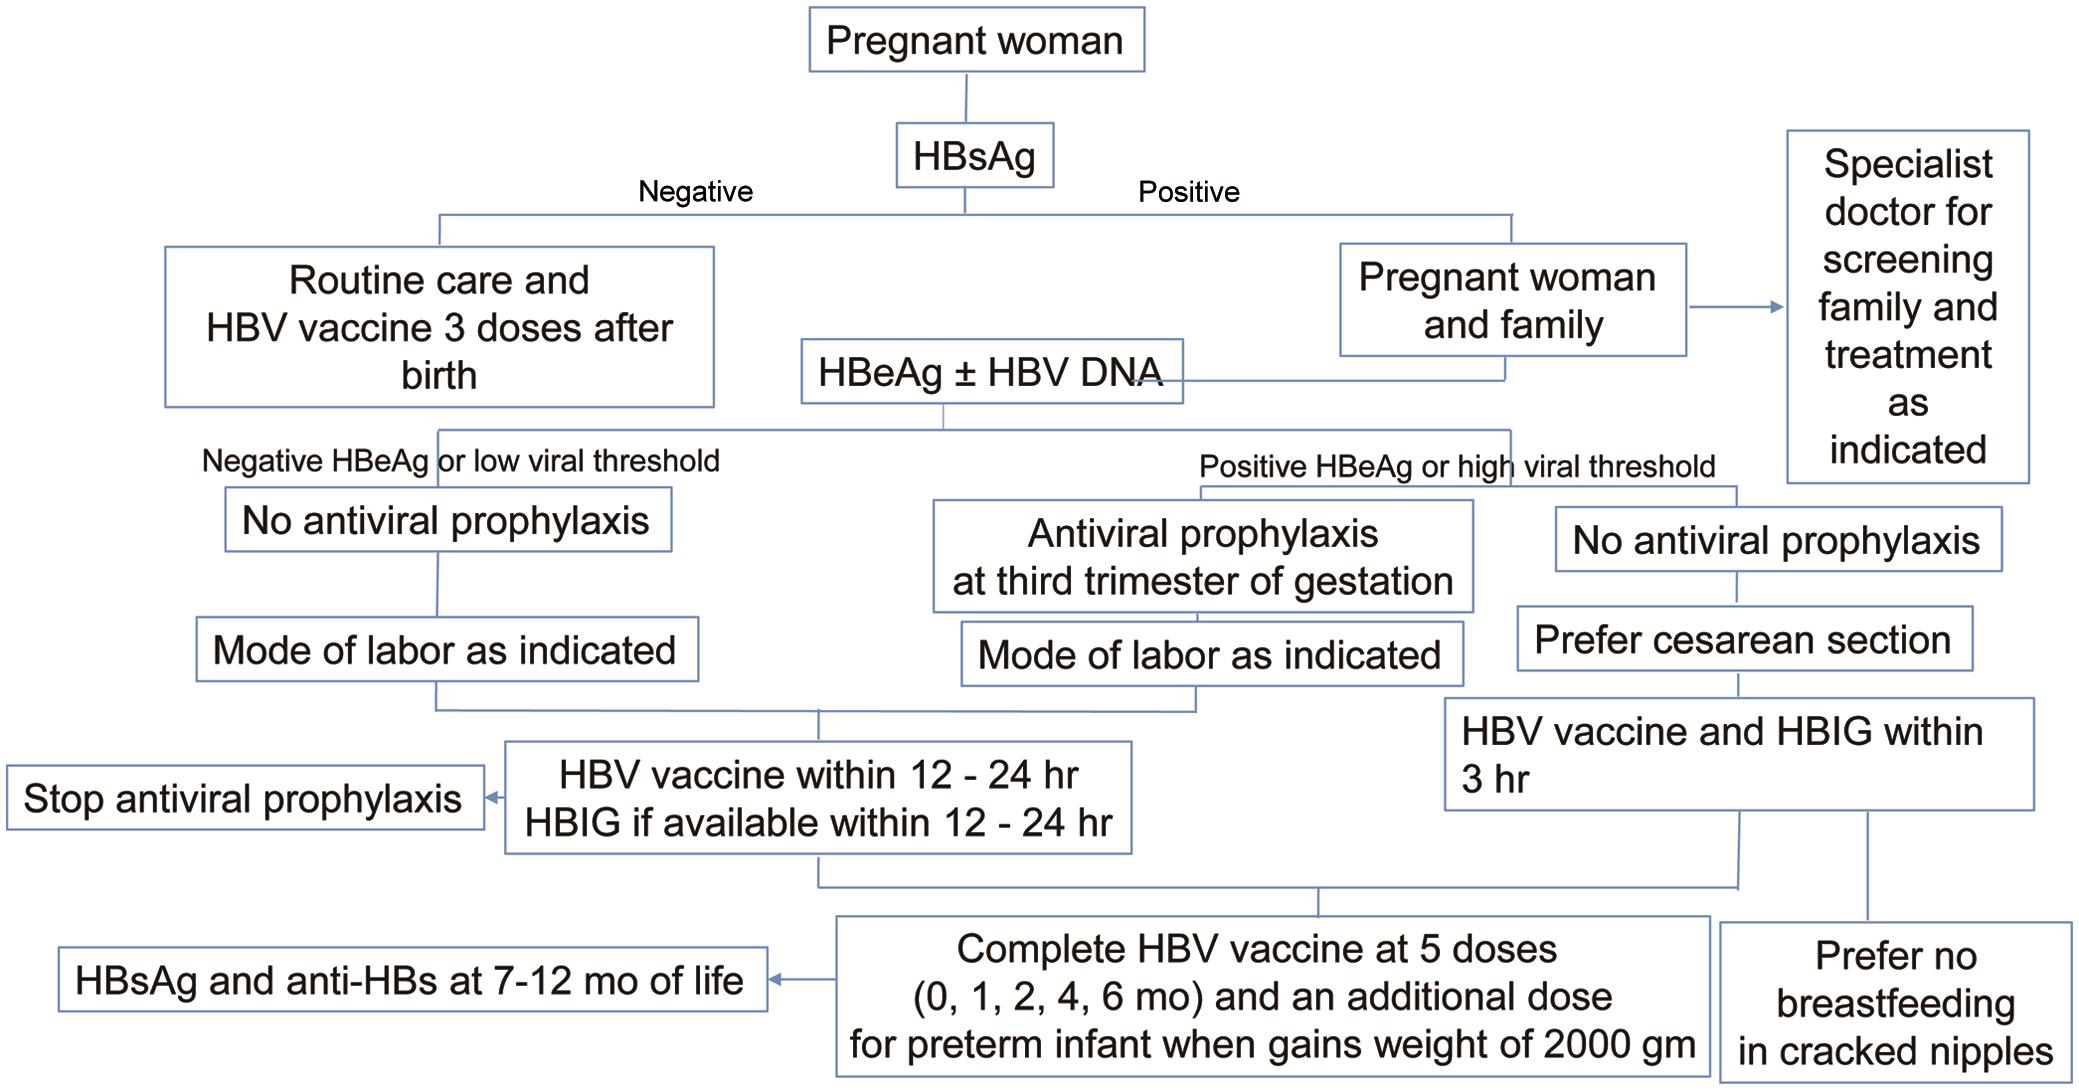 Algorithm for prevention of hepatitis B virus (HBV) infection by mother-to-child transmission (MTCT).